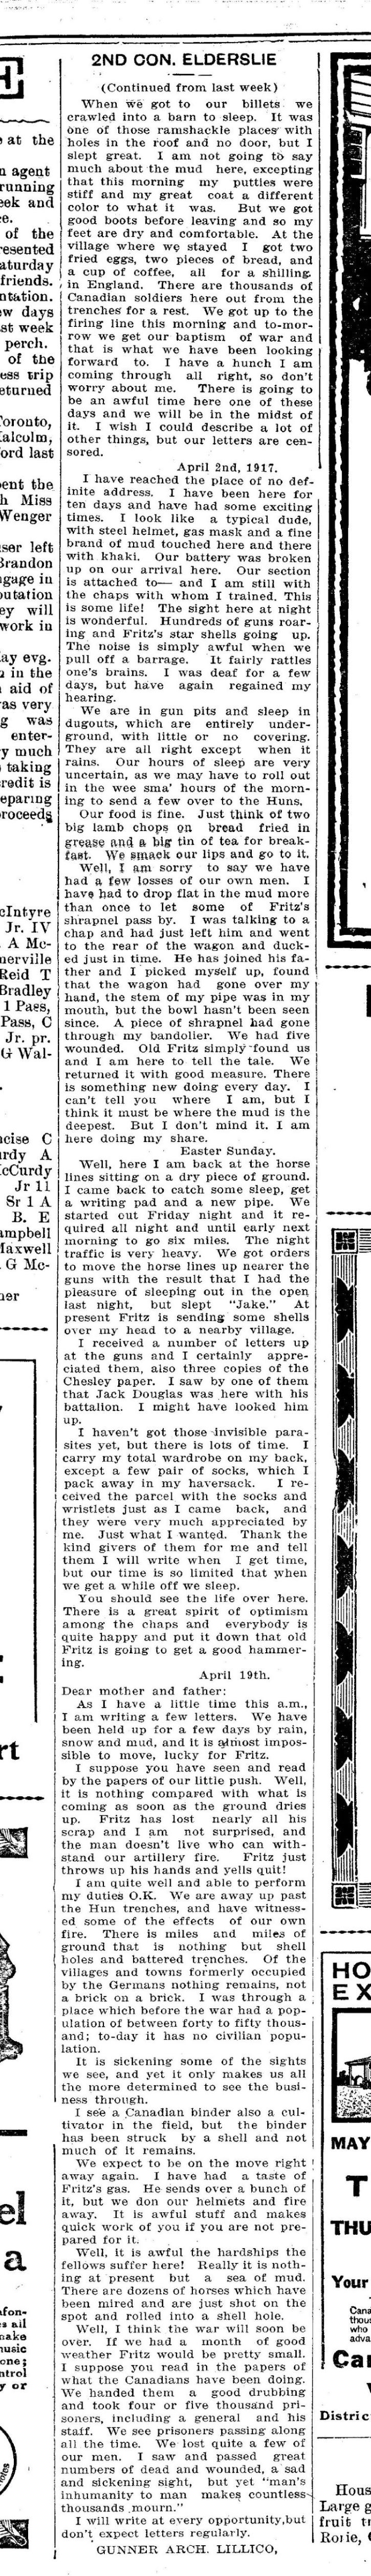 The Chesley Enterprise, May 24, 1917